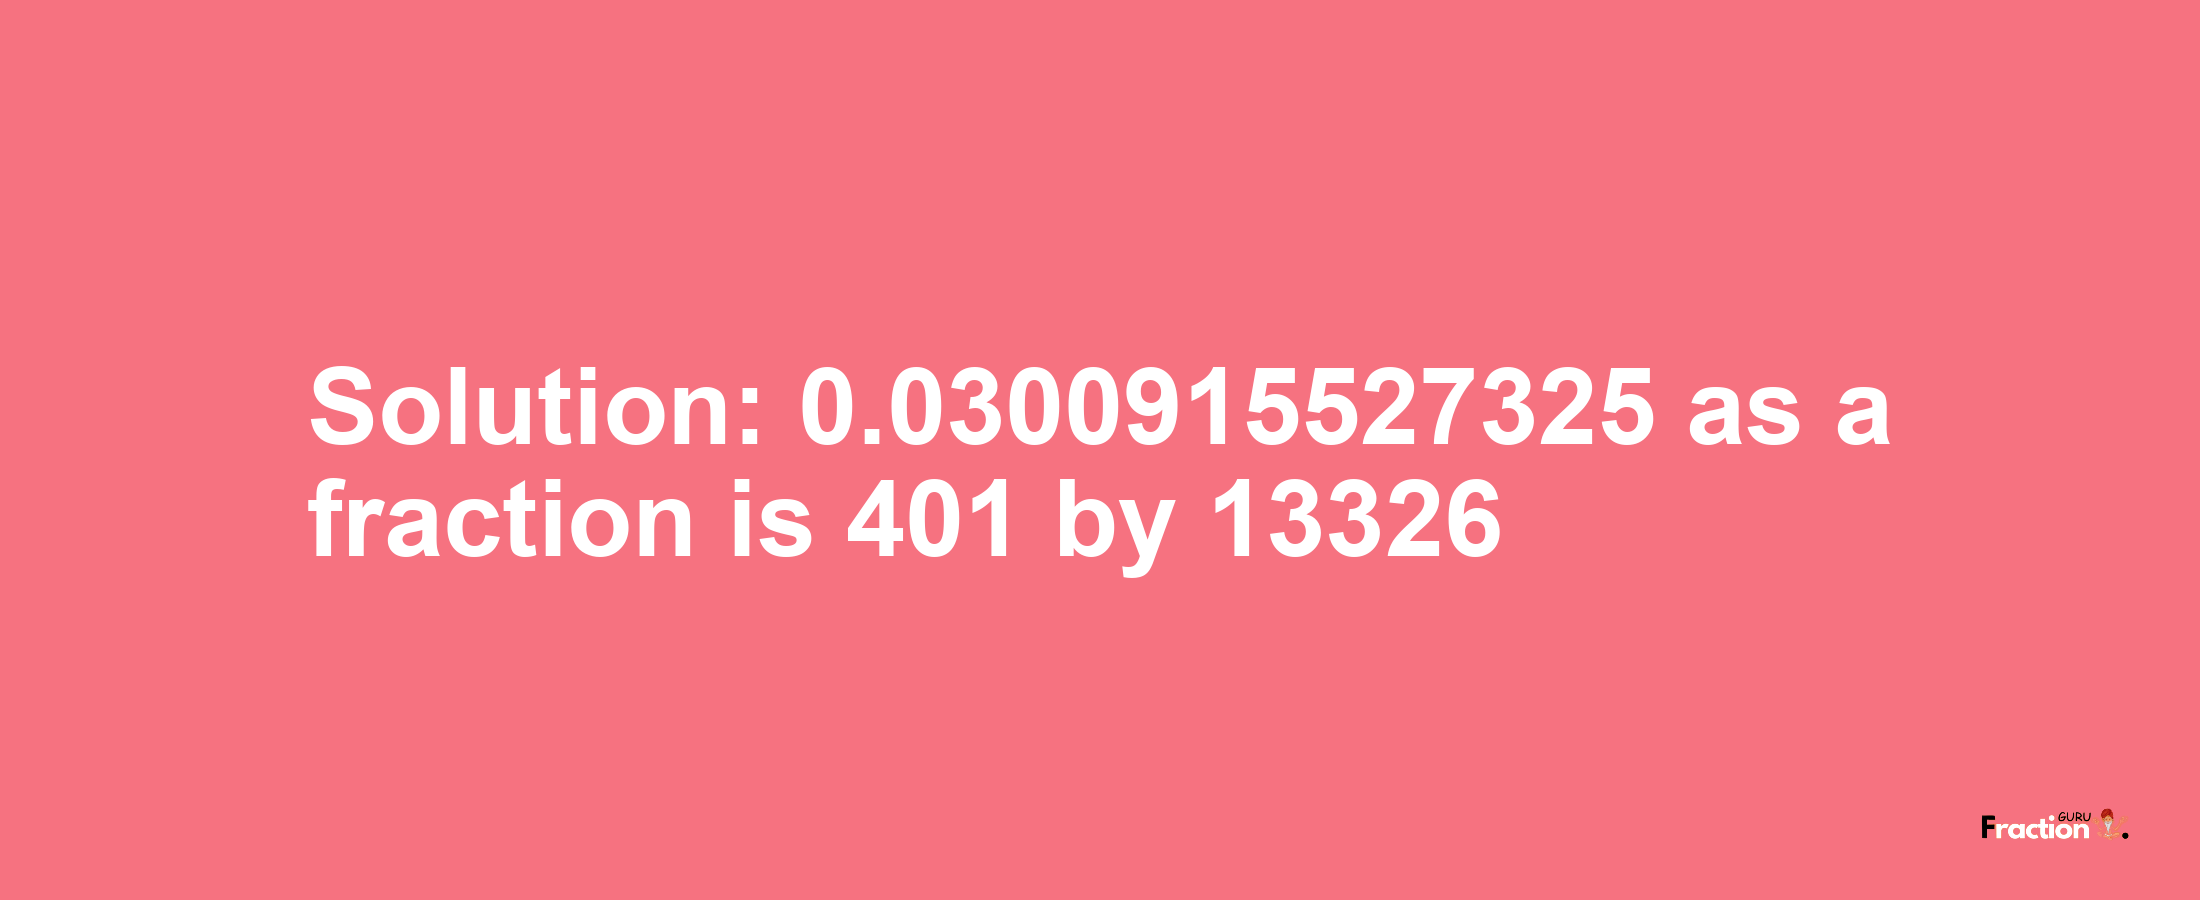 Solution:0.0300915527325 as a fraction is 401/13326